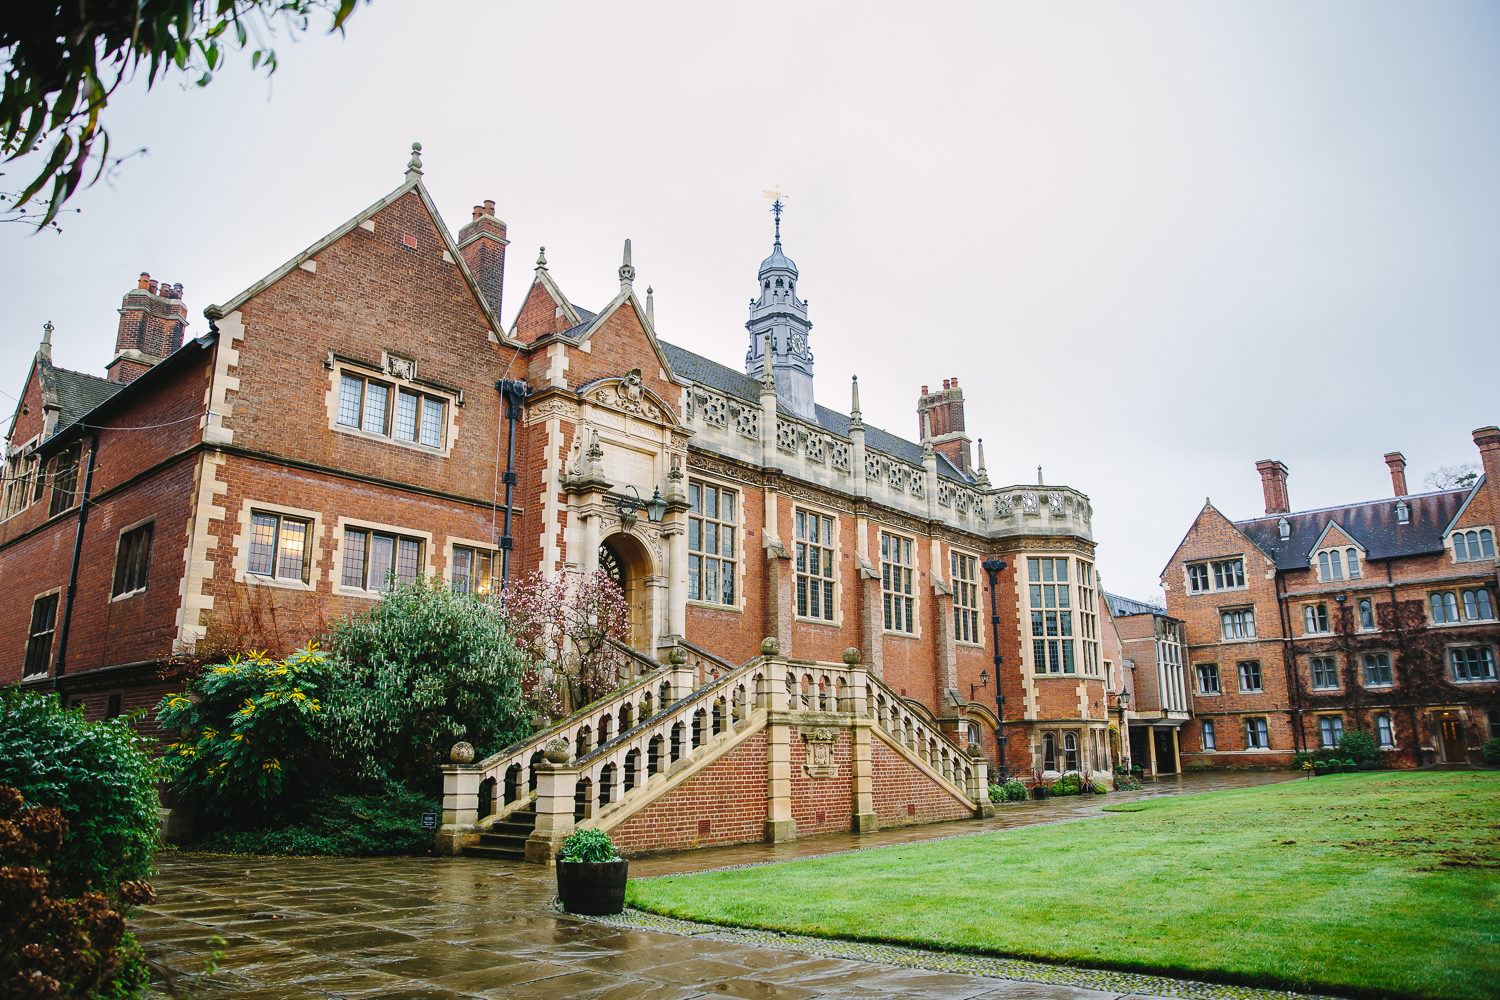 The Old Court at Selwyn College Cambridge University